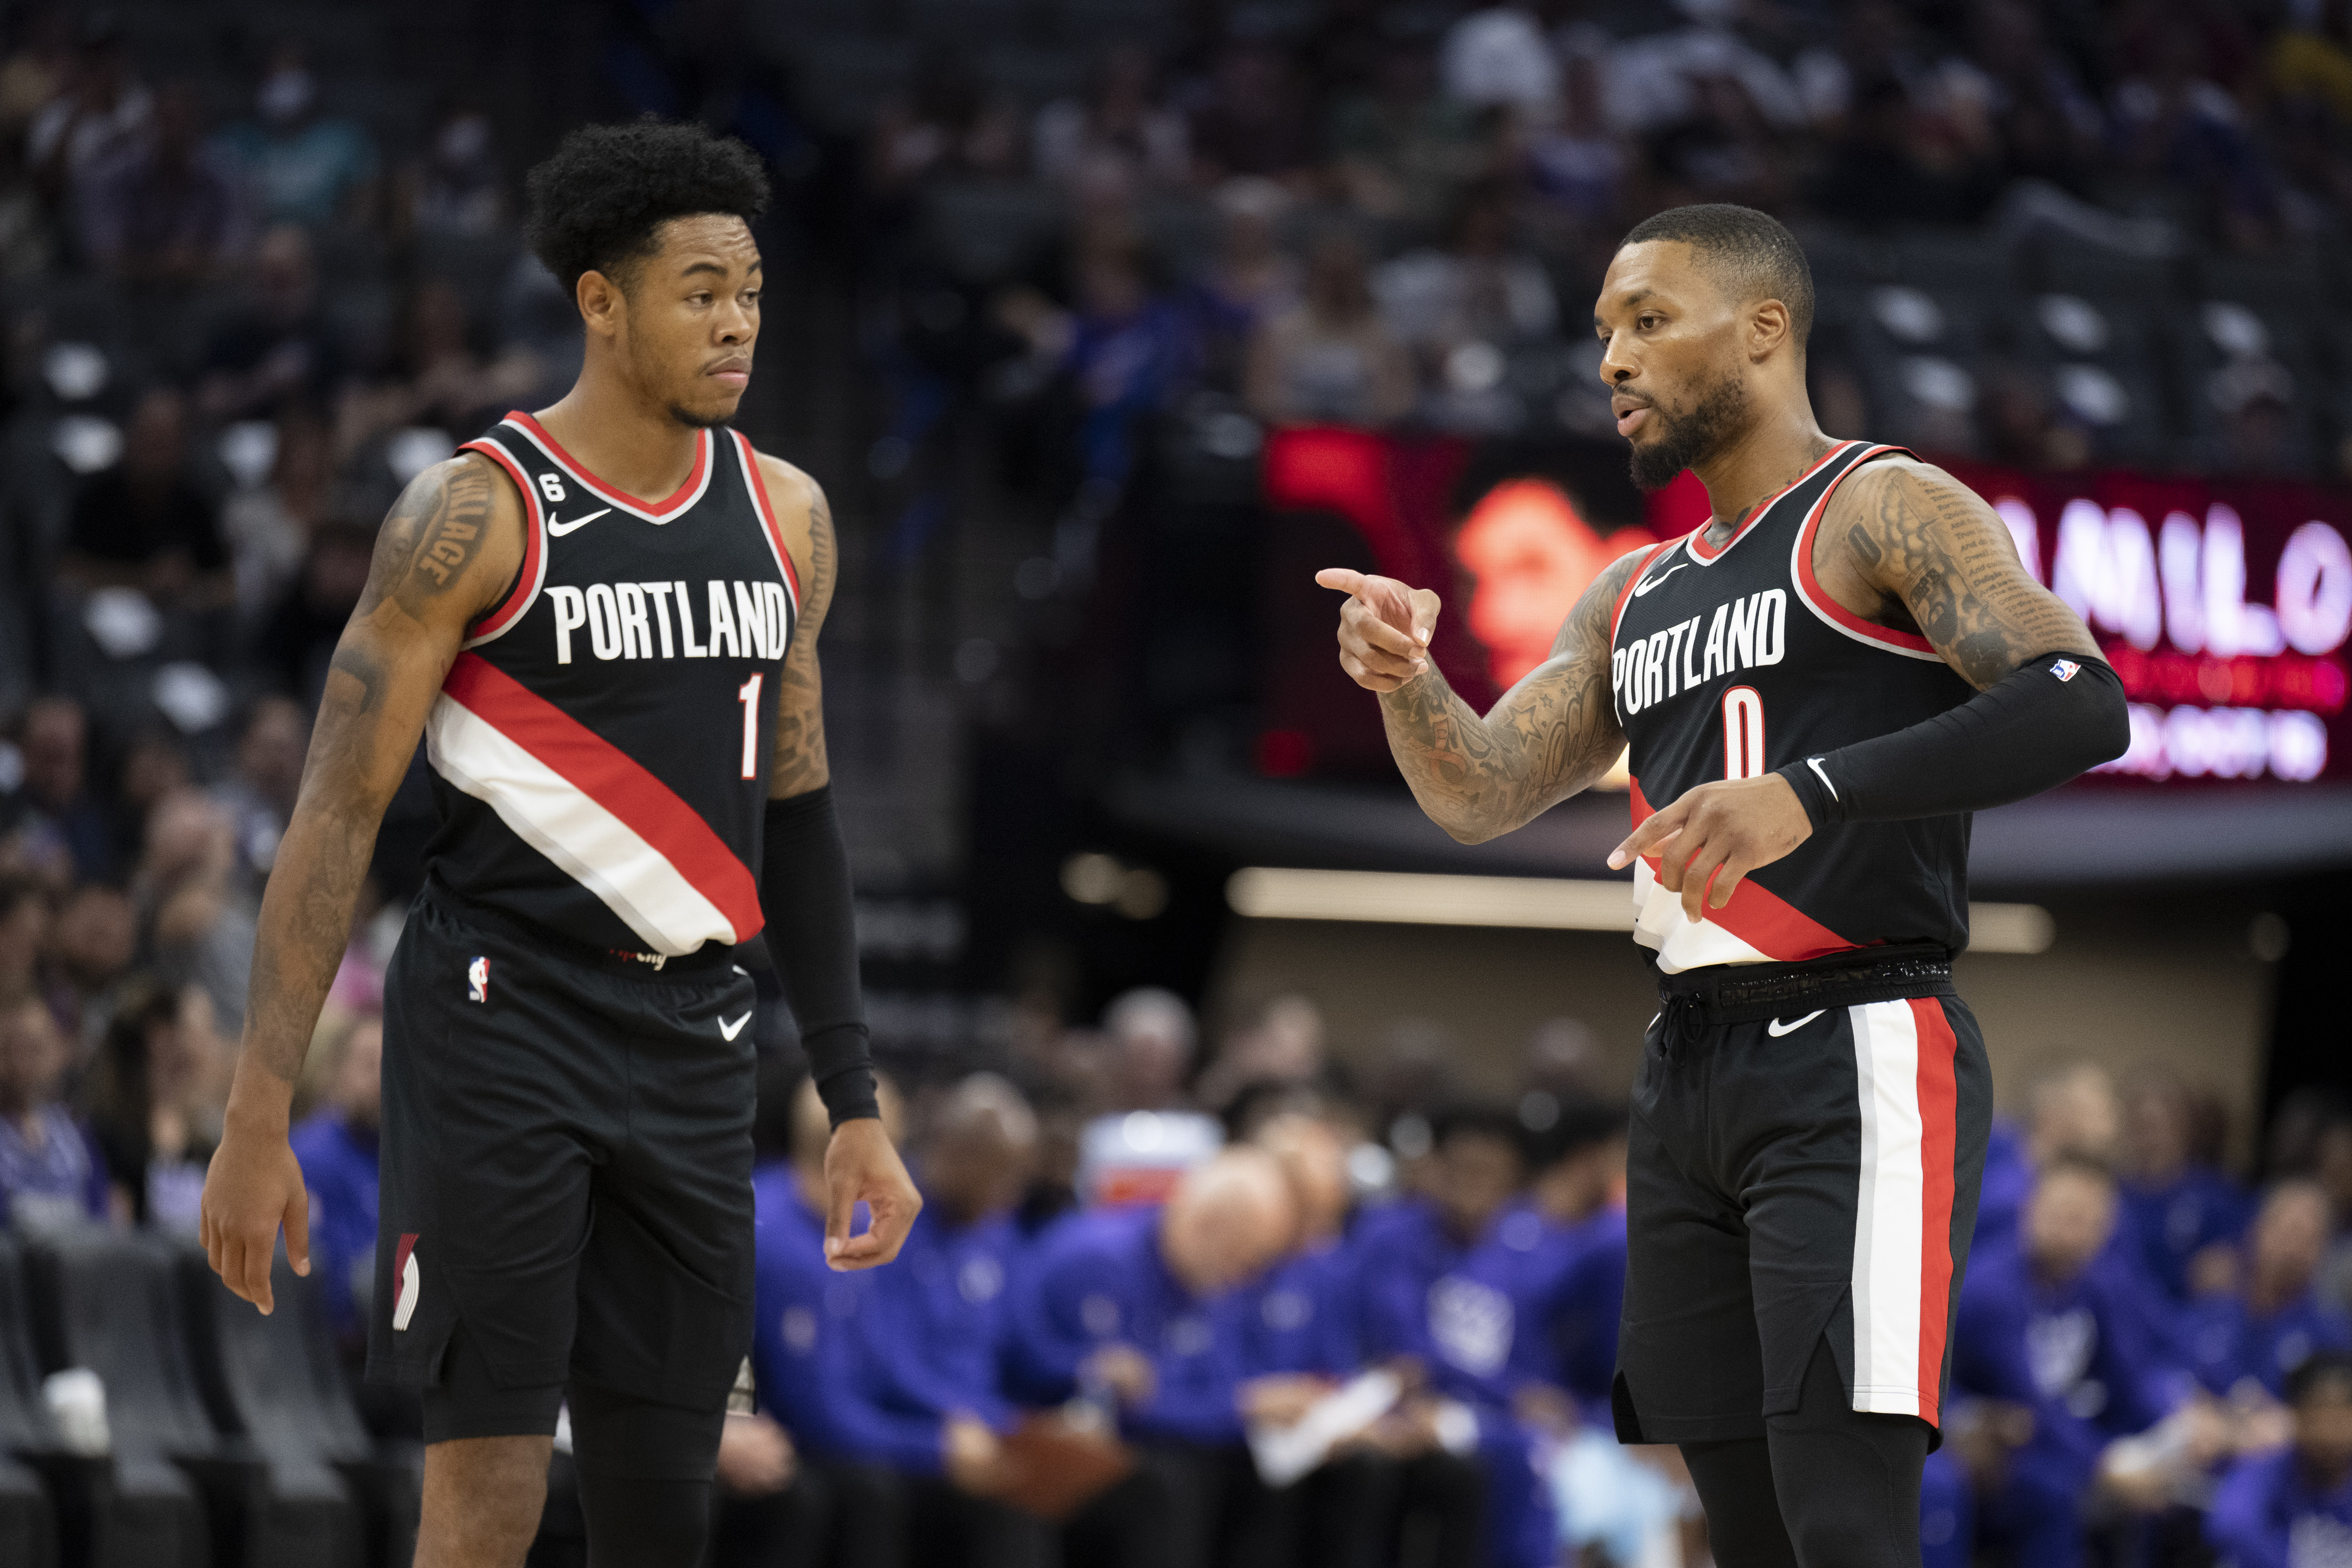 Portland Trail Blazers at Golden State Warriors Game preview, time, TV channel, how to watch free live stream online